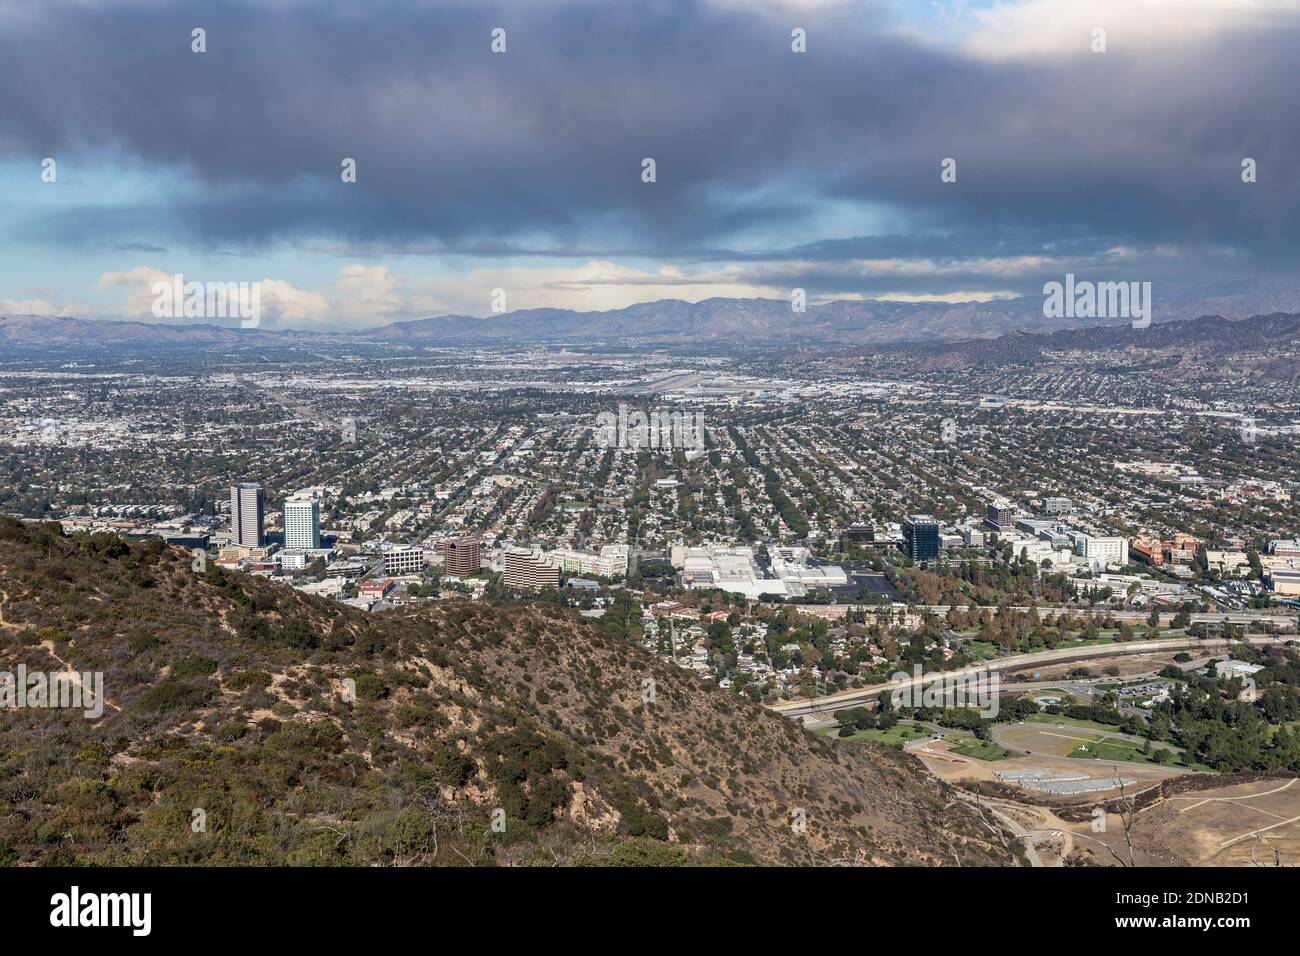 Storm clouds above Burbank and the San Fernando Valley area of Los Angeles, California. Stock Photo